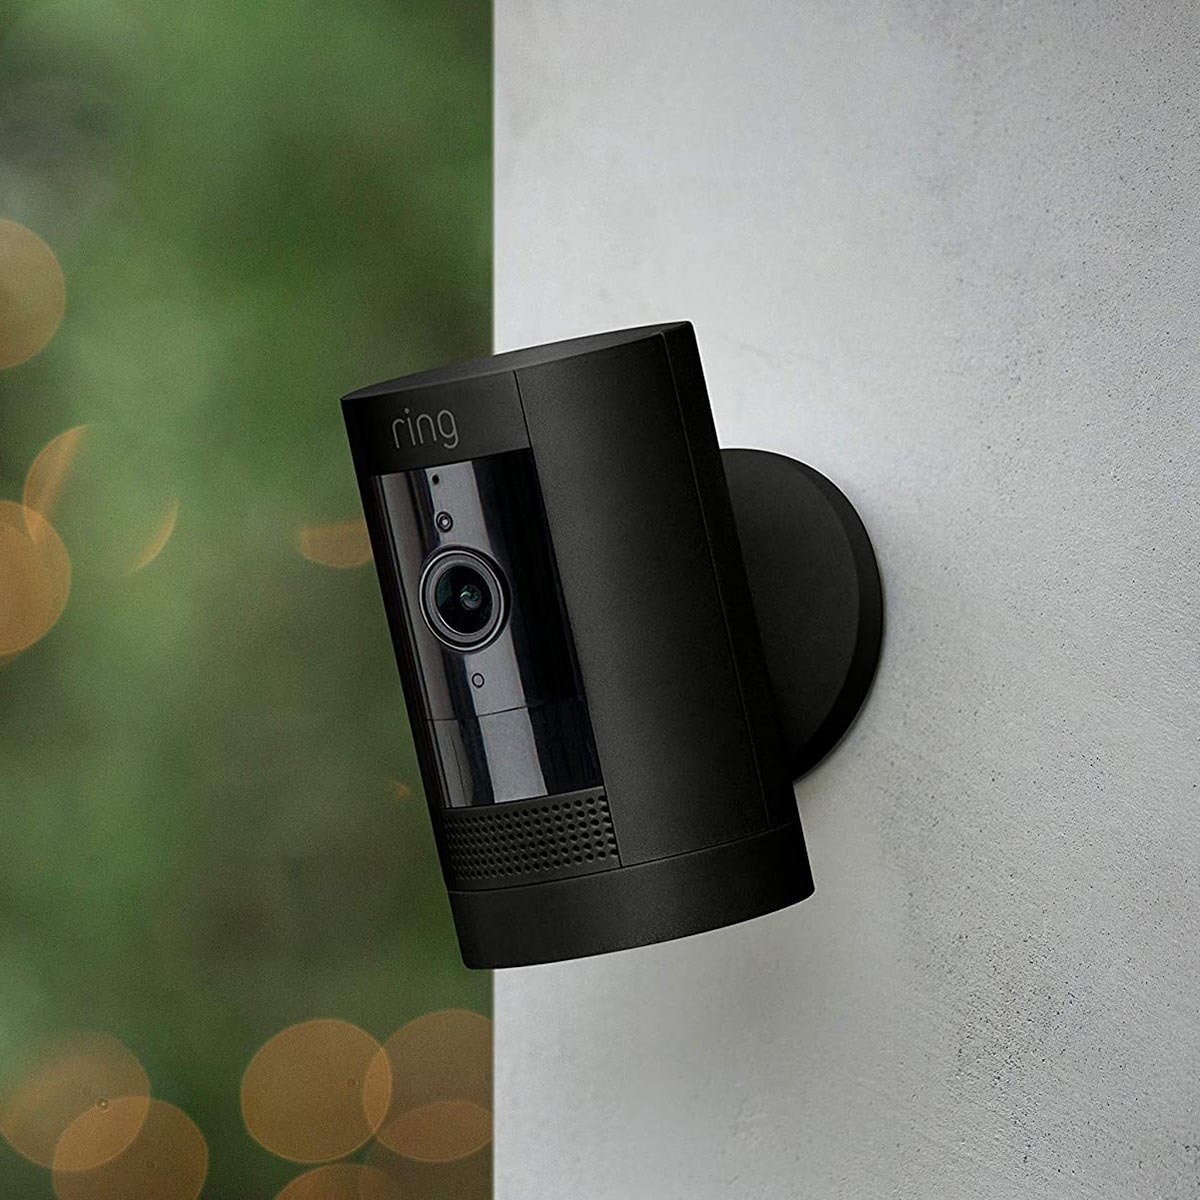 Lifestyle image of stick up cam on wall